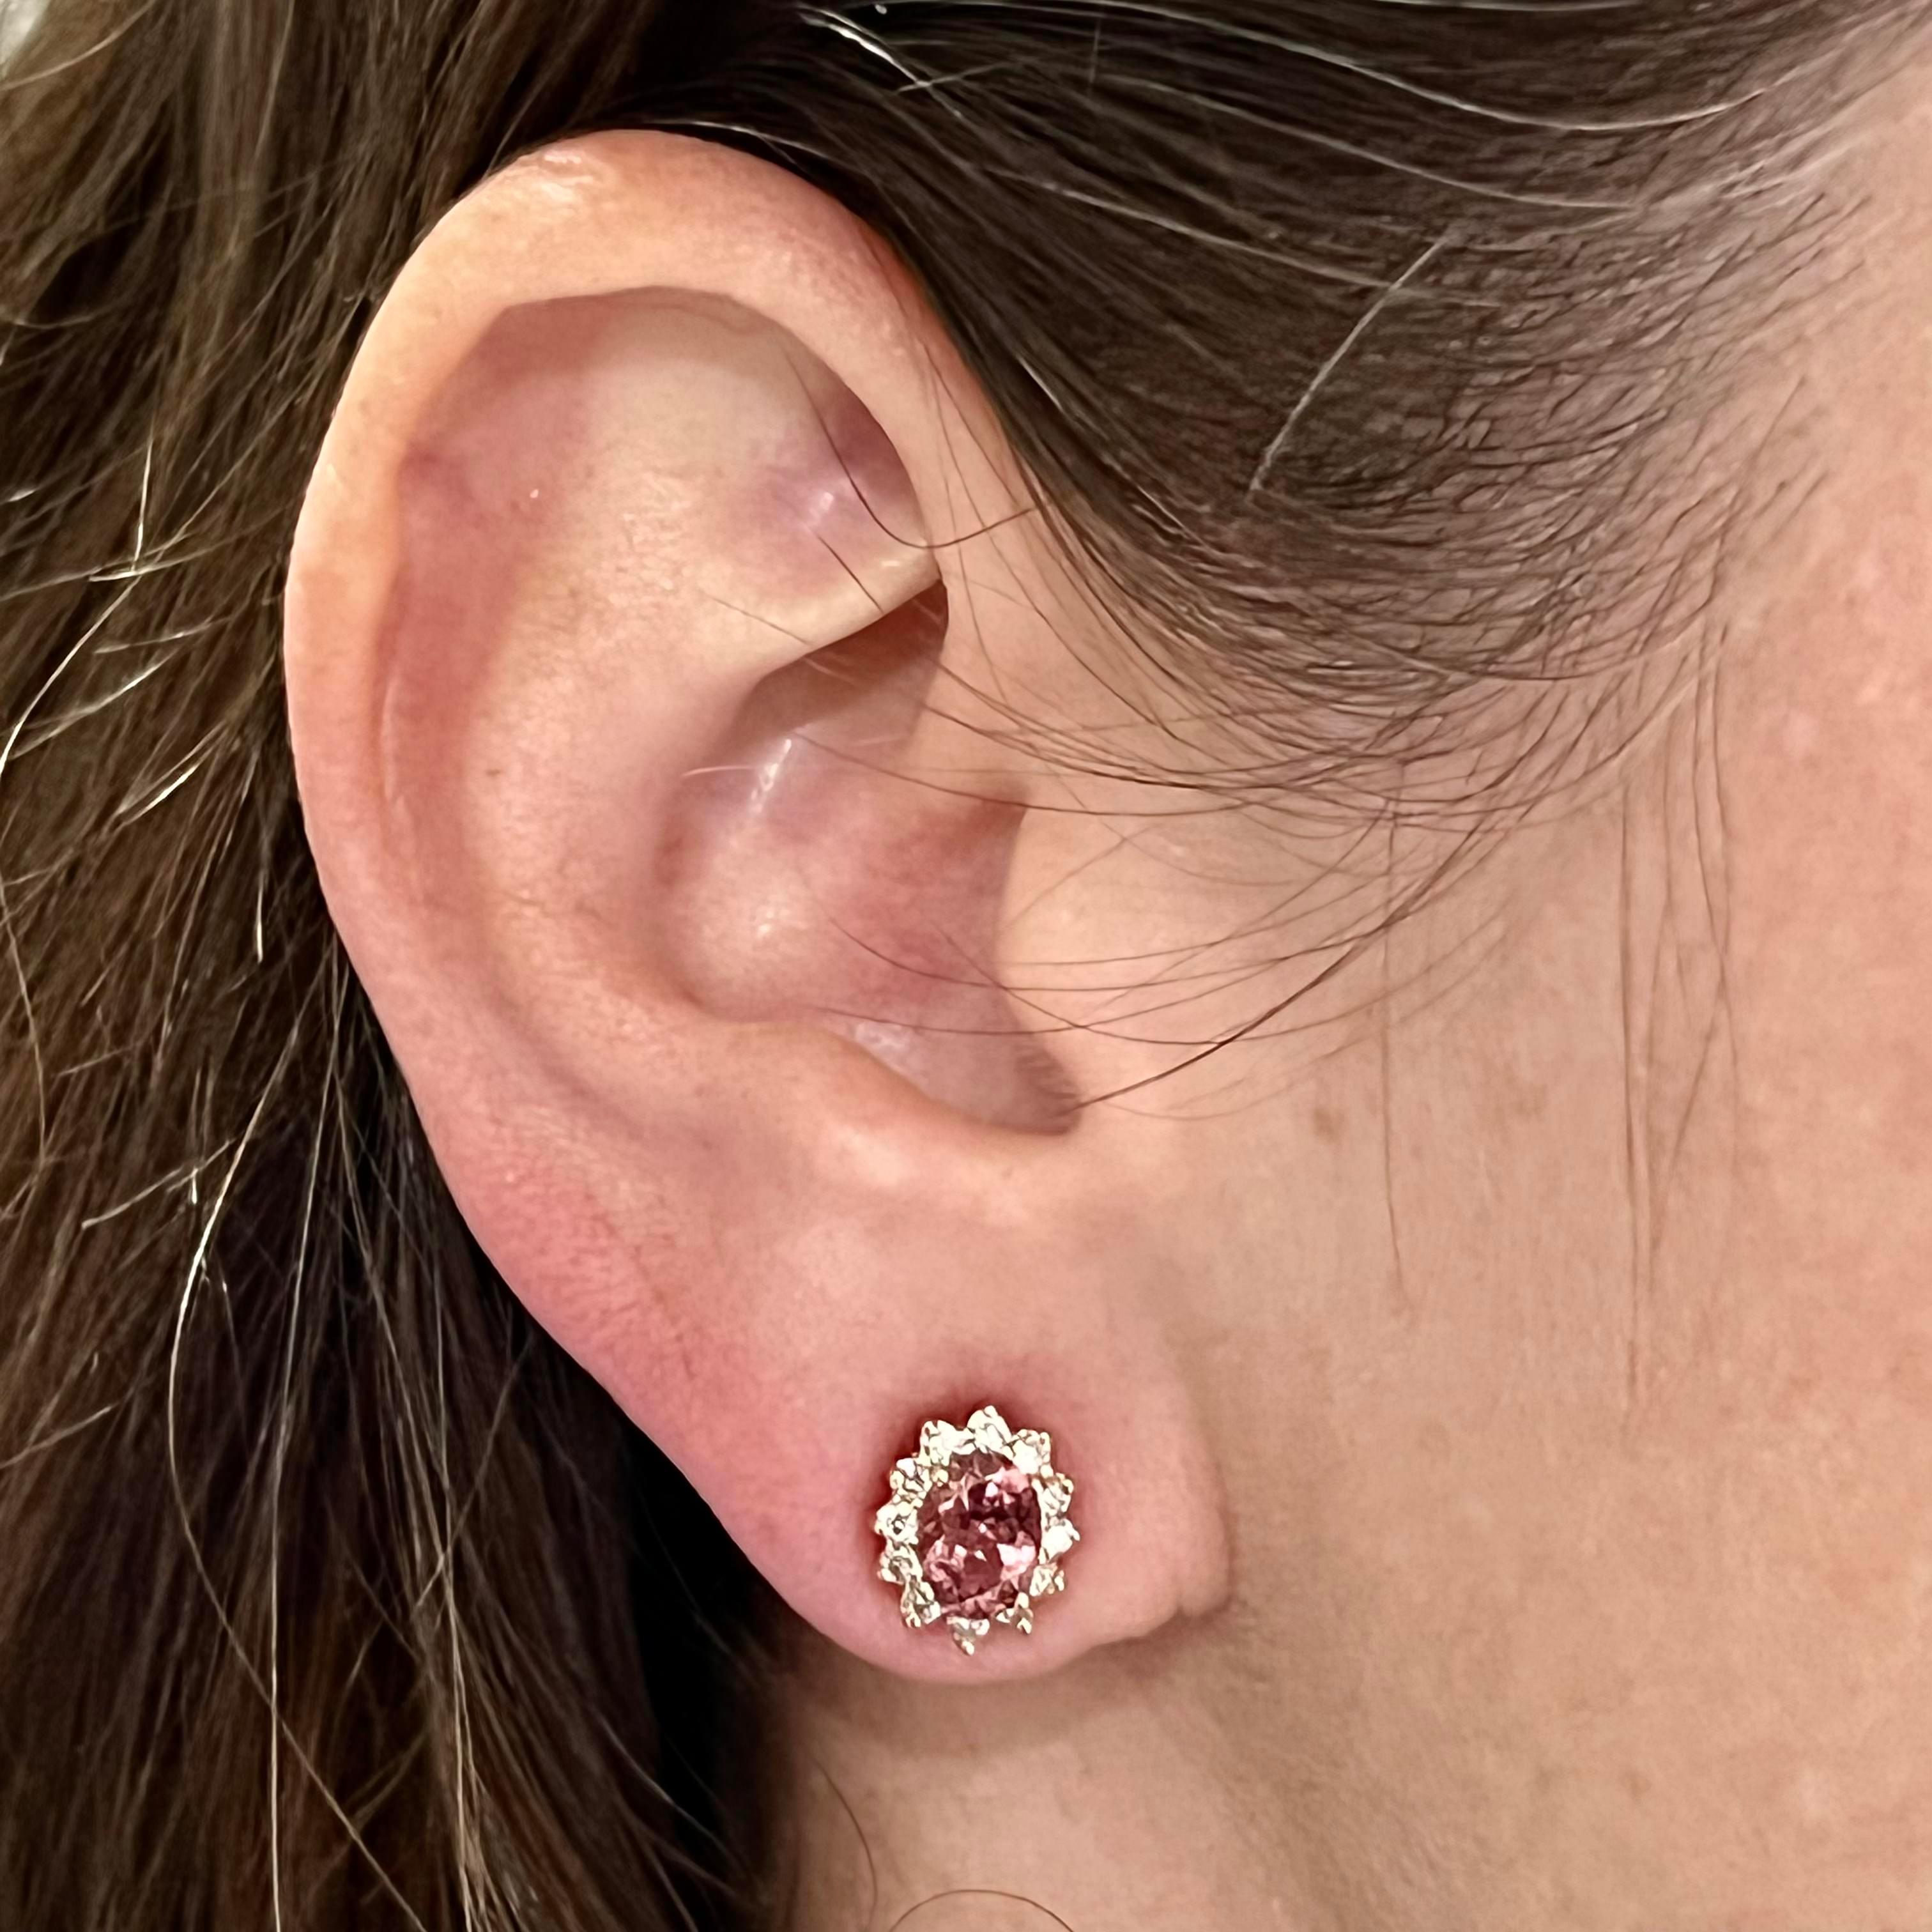 Natural Finely Faceted Quality Tourmaline Diamond Earrings 14k Yellow Gold 1.94 TCW Certified $3,950 211193

Nothing says, “I Love you” more than Diamonds and Pearls!

These Tourmaline earrings have been Certified, Inspected, and Appraised by